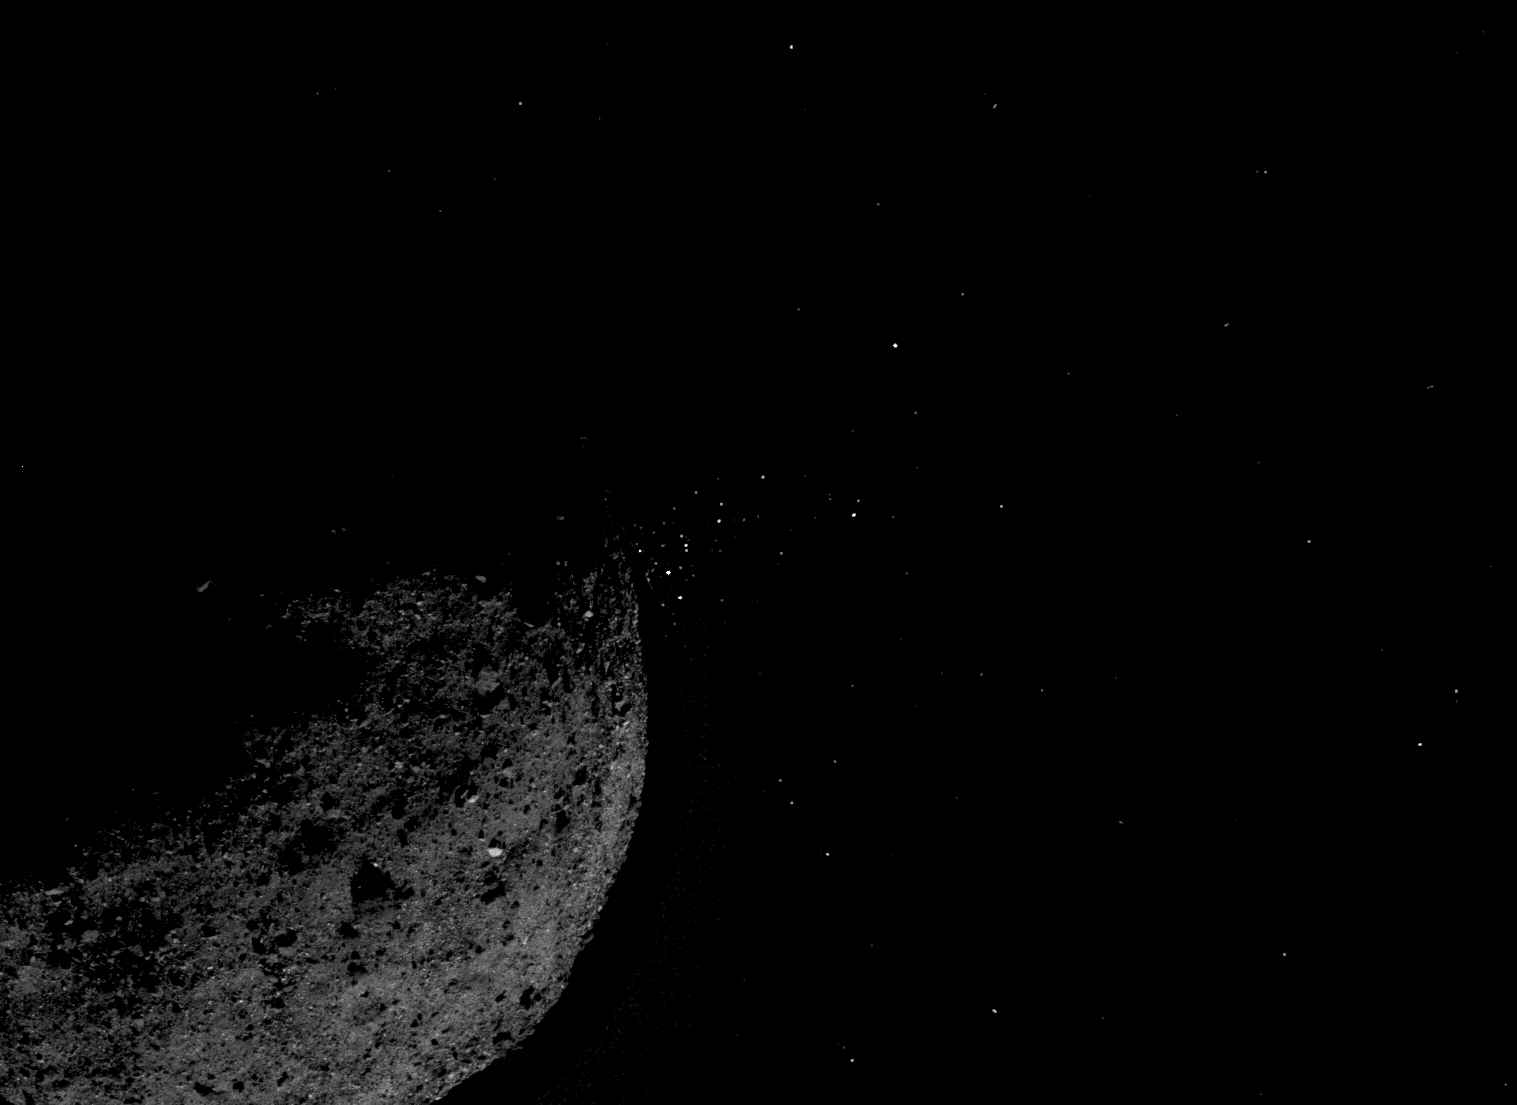 rocky asteroid ejecting small particles into space